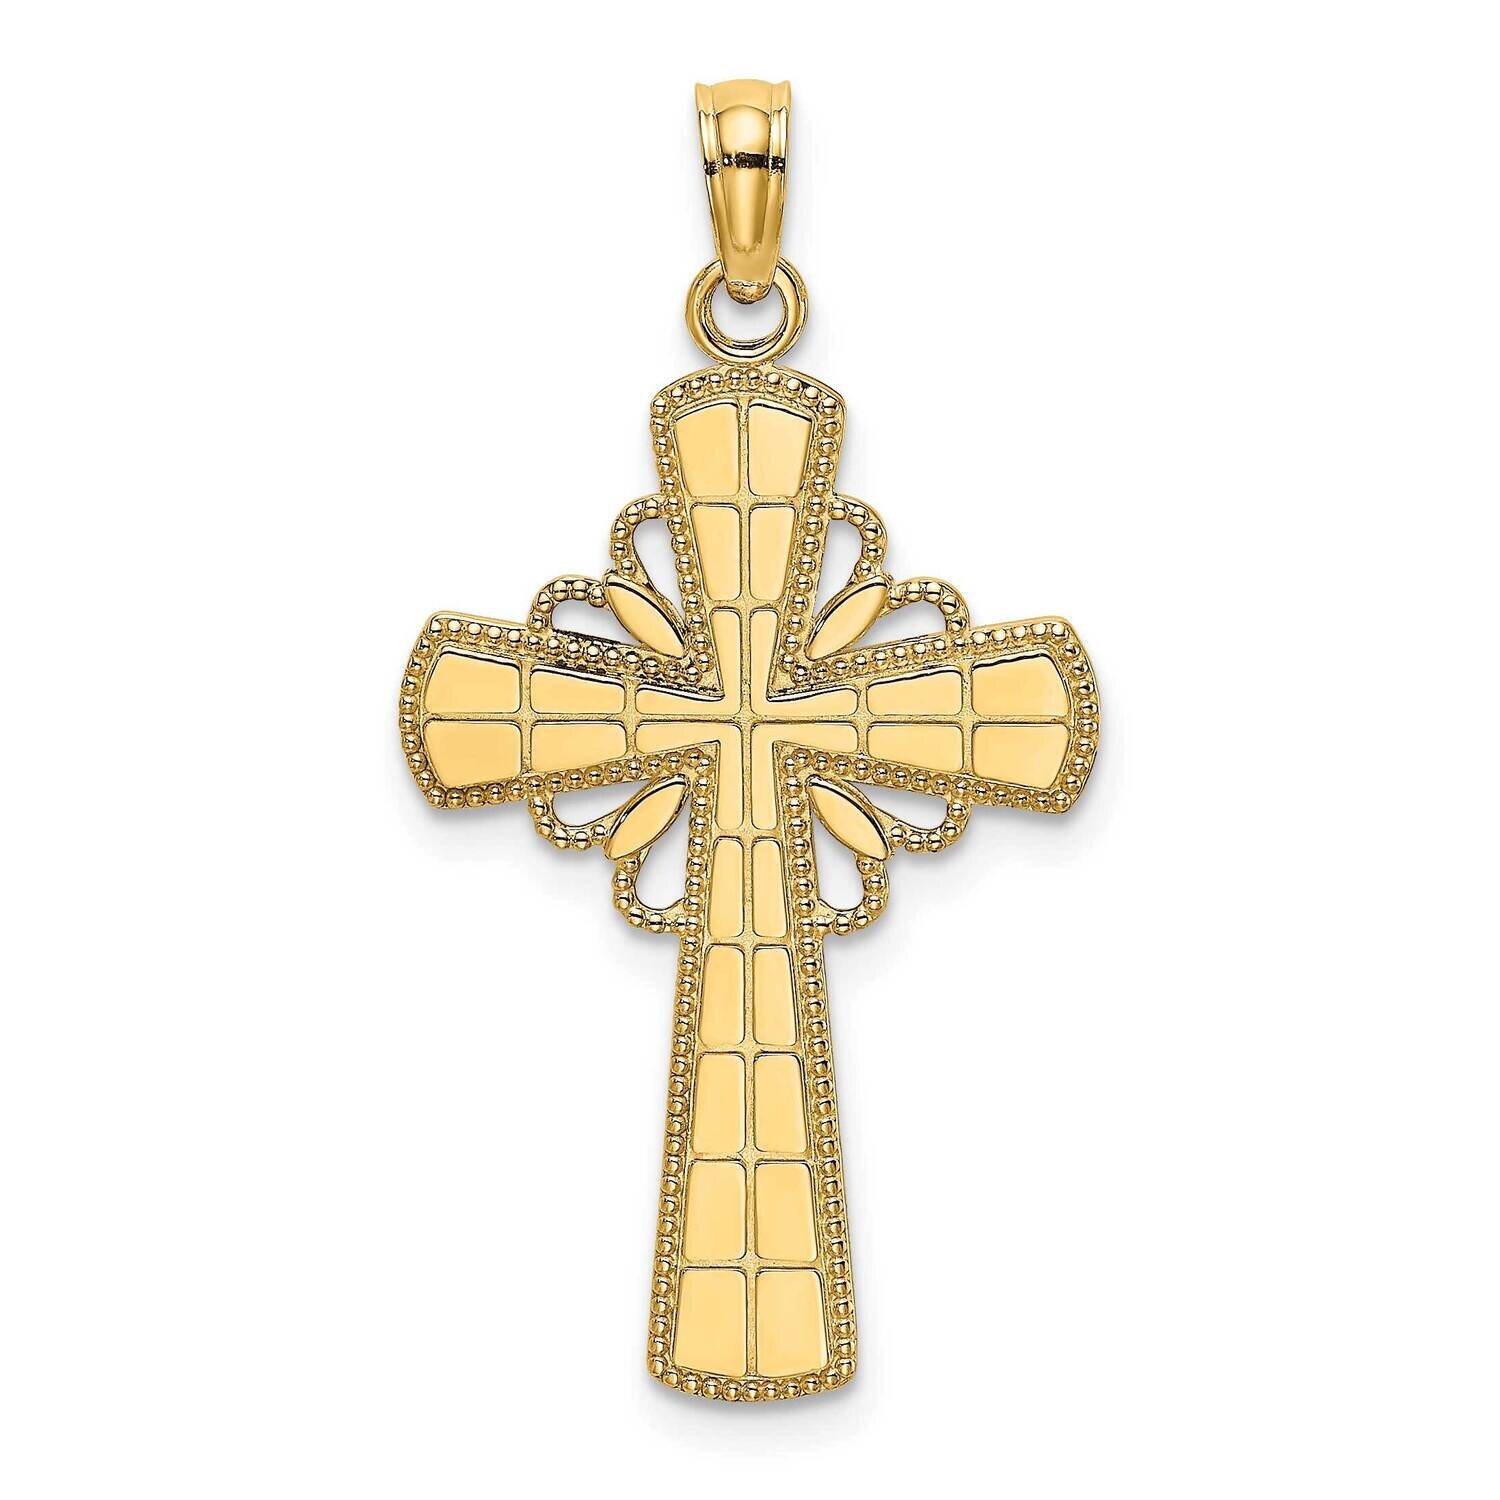 Beaded Edge Grid Accent Cross Charm 14k Gold Polished K8435